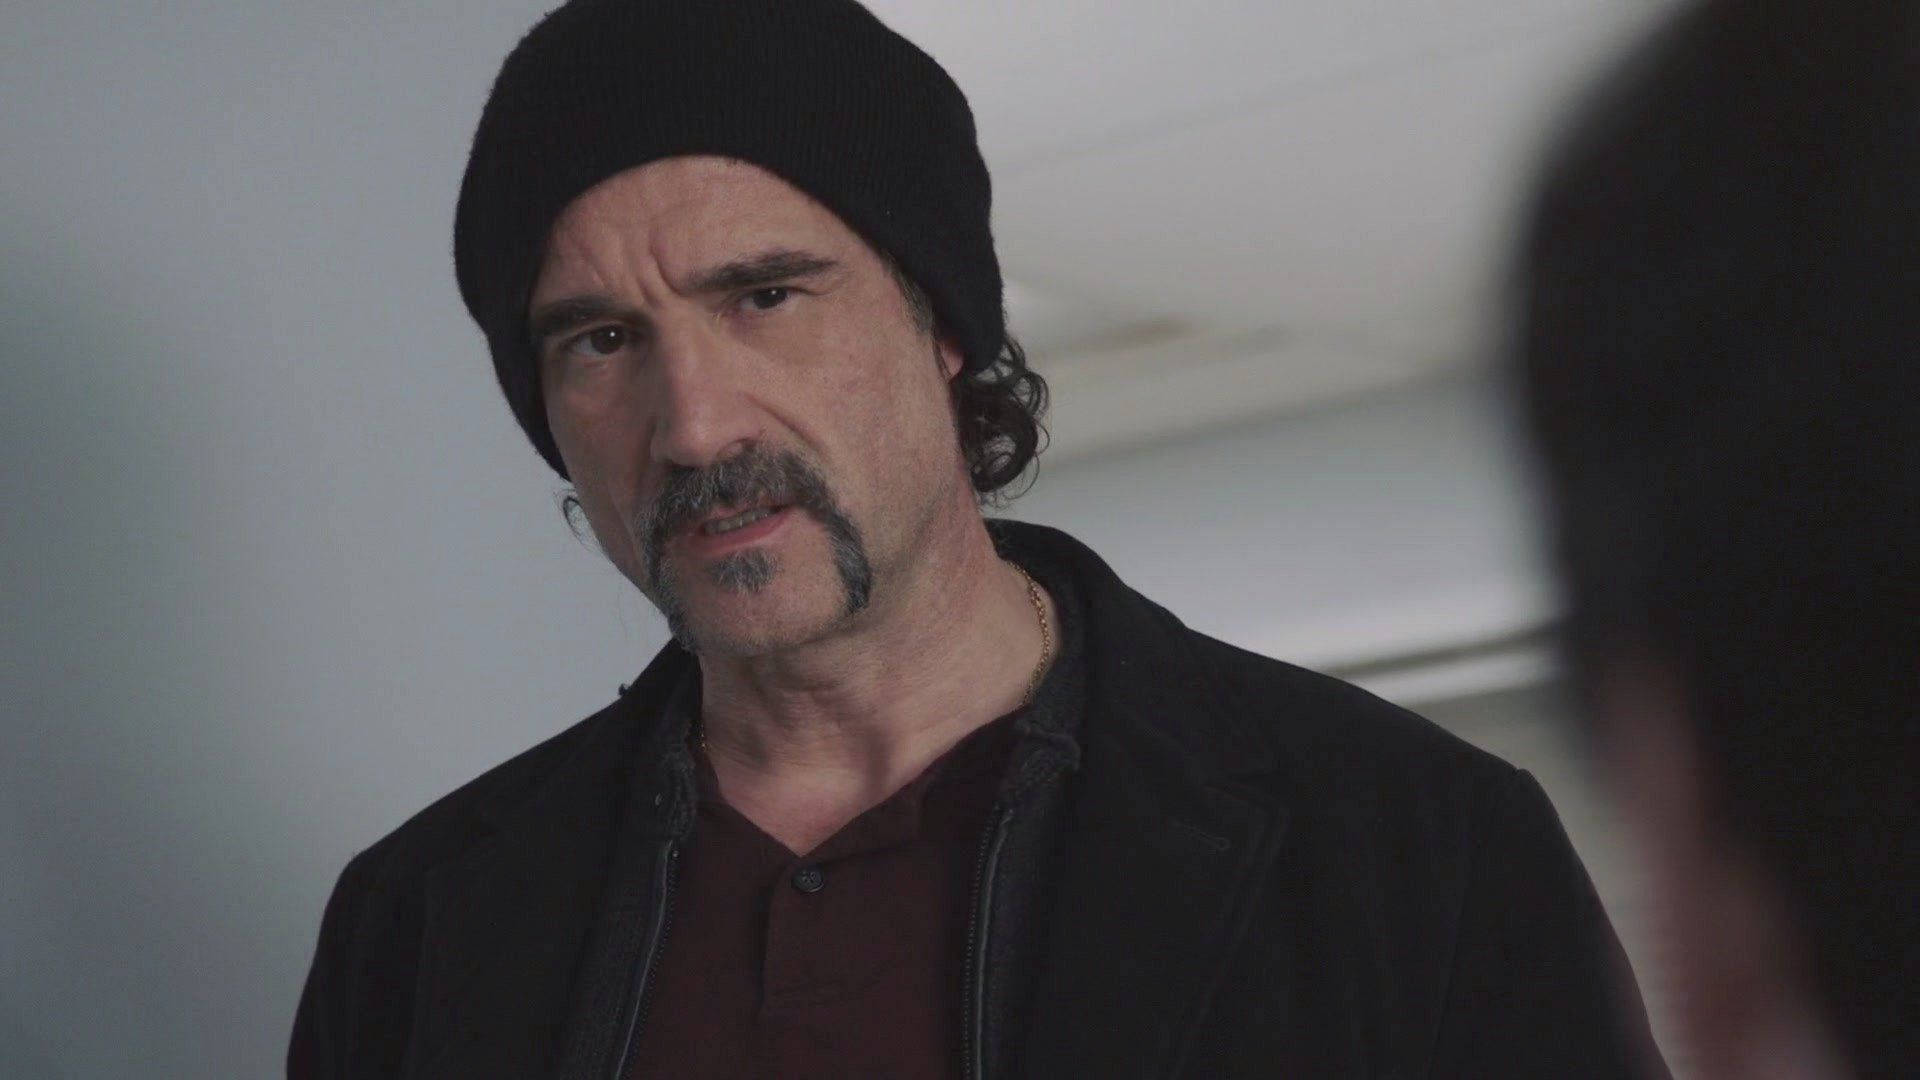 Beanieelias Koteas Is Not A Sentence Or A Phrase. It Appears To Be A Name Or A Combination Of Names. If You Would Like A Translation Related To Computer Or Mobile Wallpaper, Please Provide A Sentence Or Phrase To Be Translated. Wallpaper